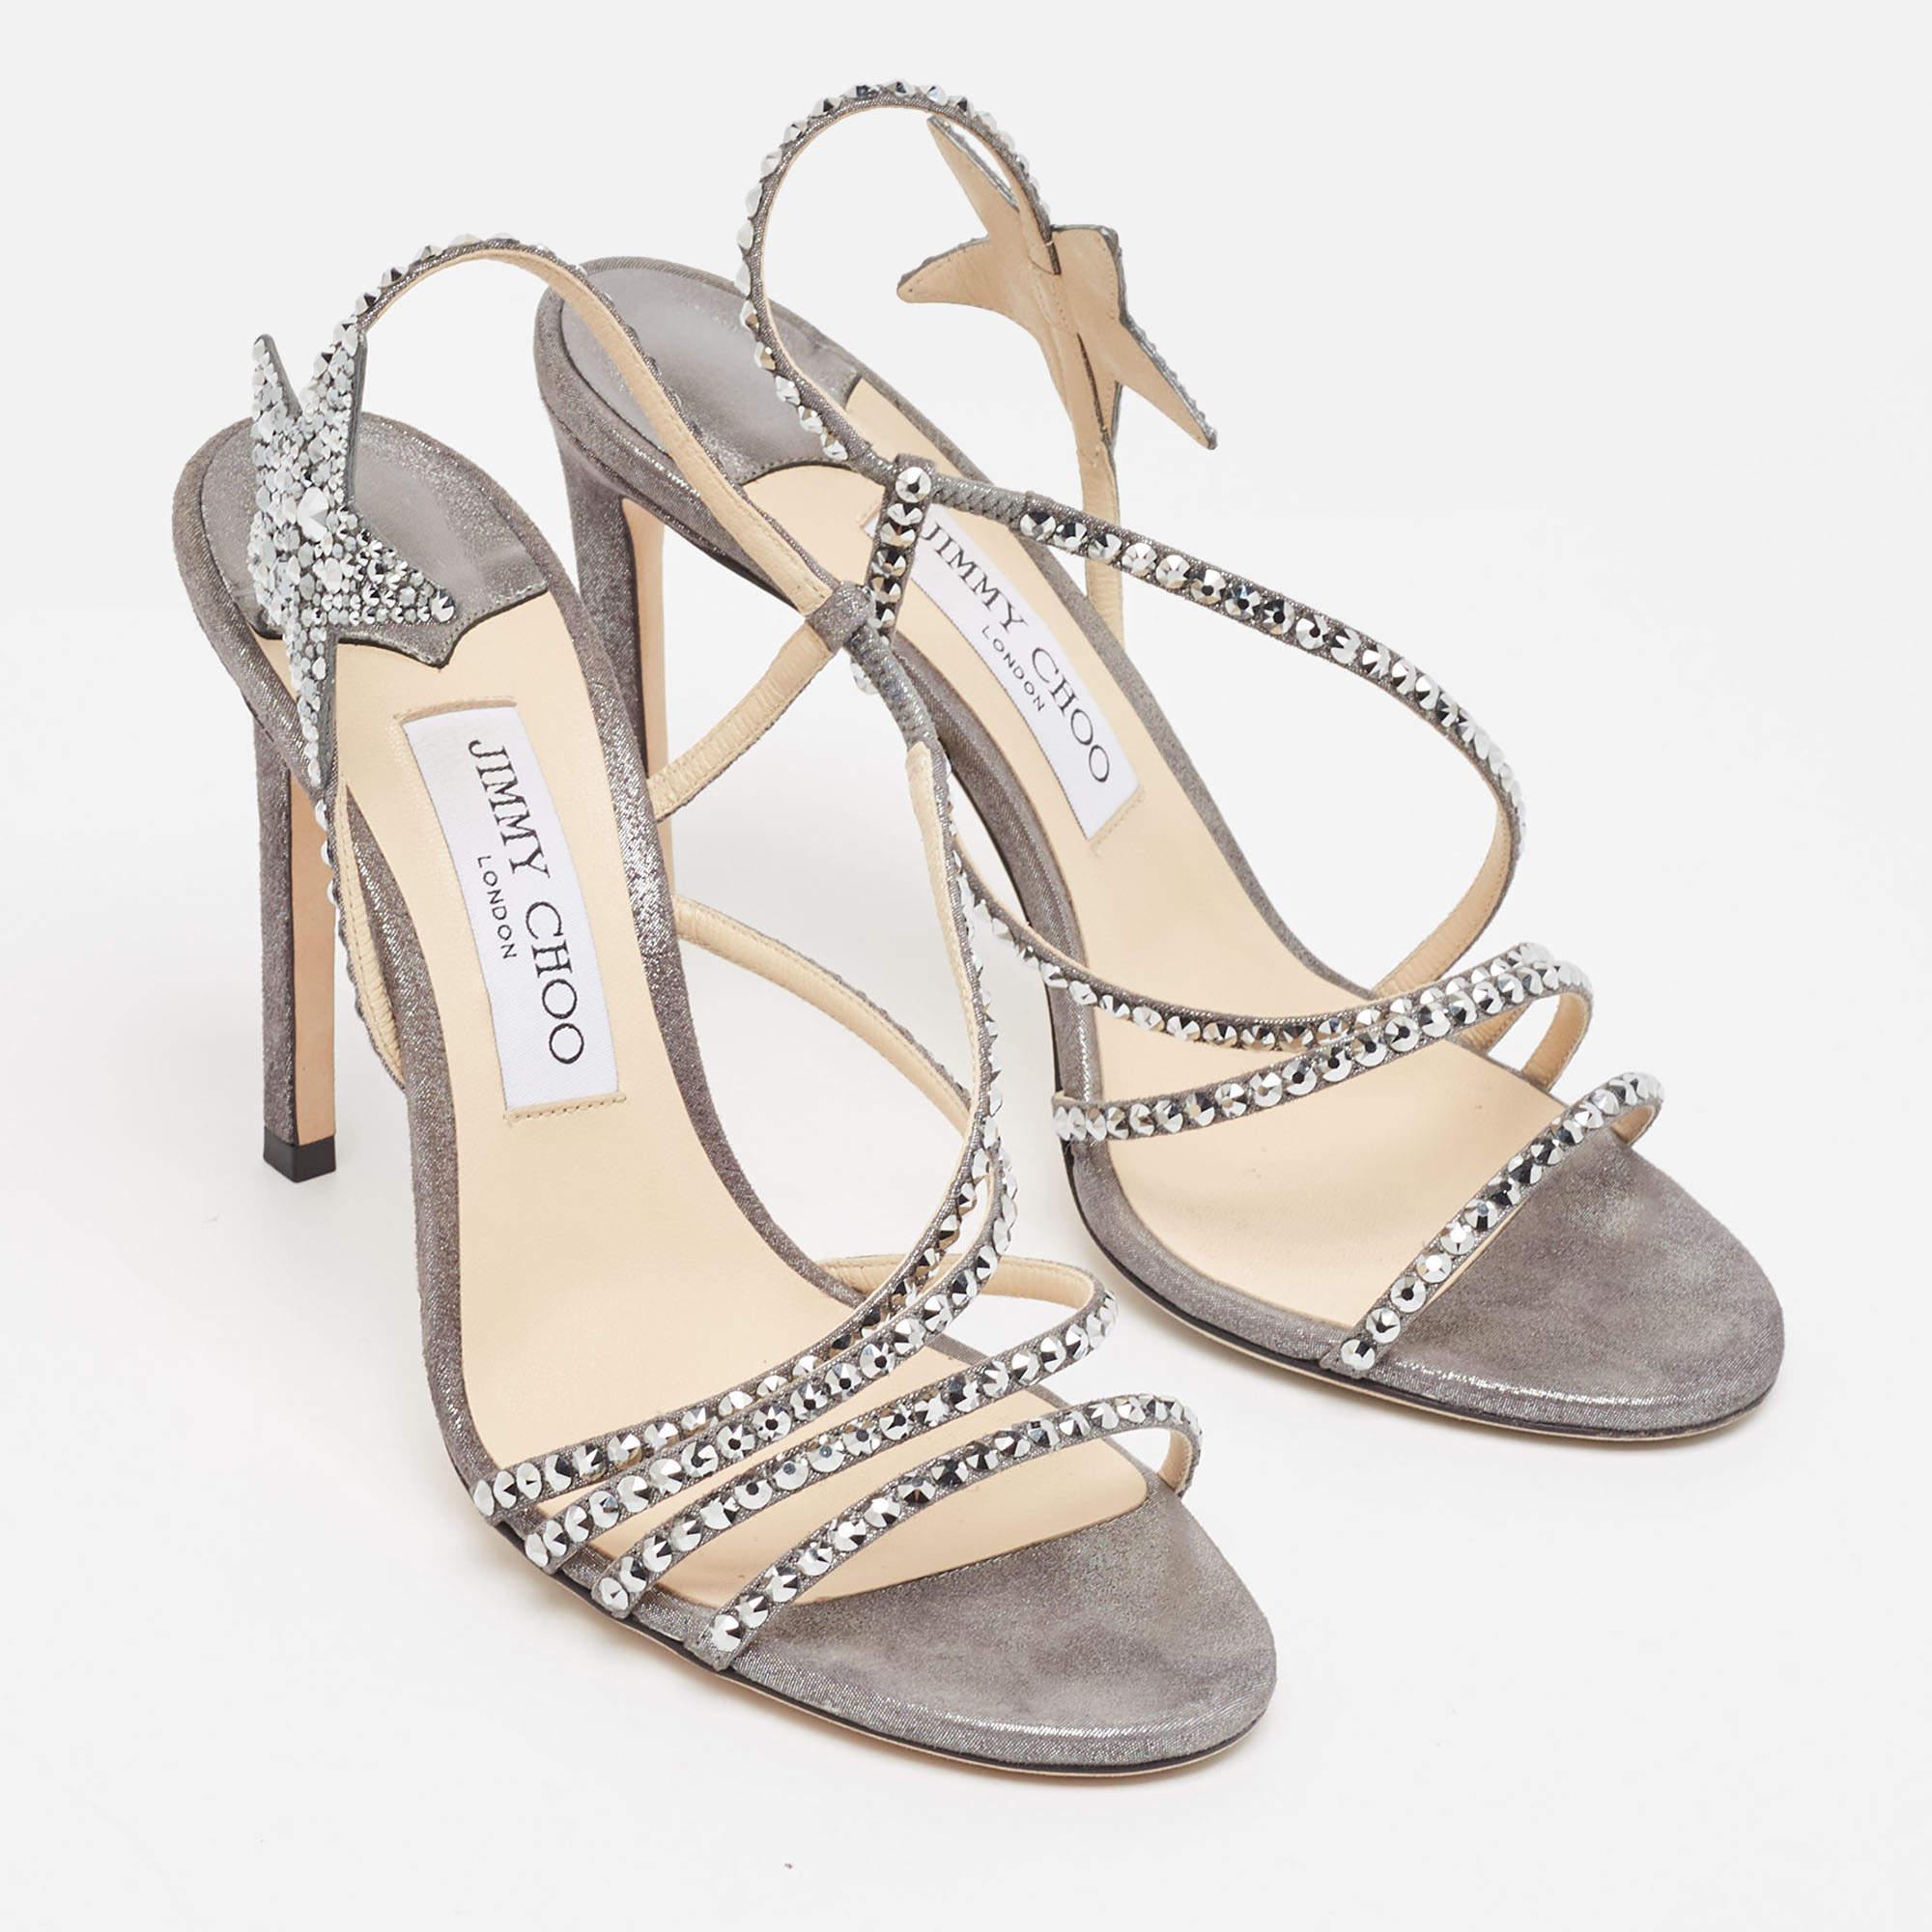 Lend an elegant finish to your look of the day with these Jimmy Choo shimmer sandals. They feature open toes, star details, and 10.5 cm heels.

Includes: Original Box

